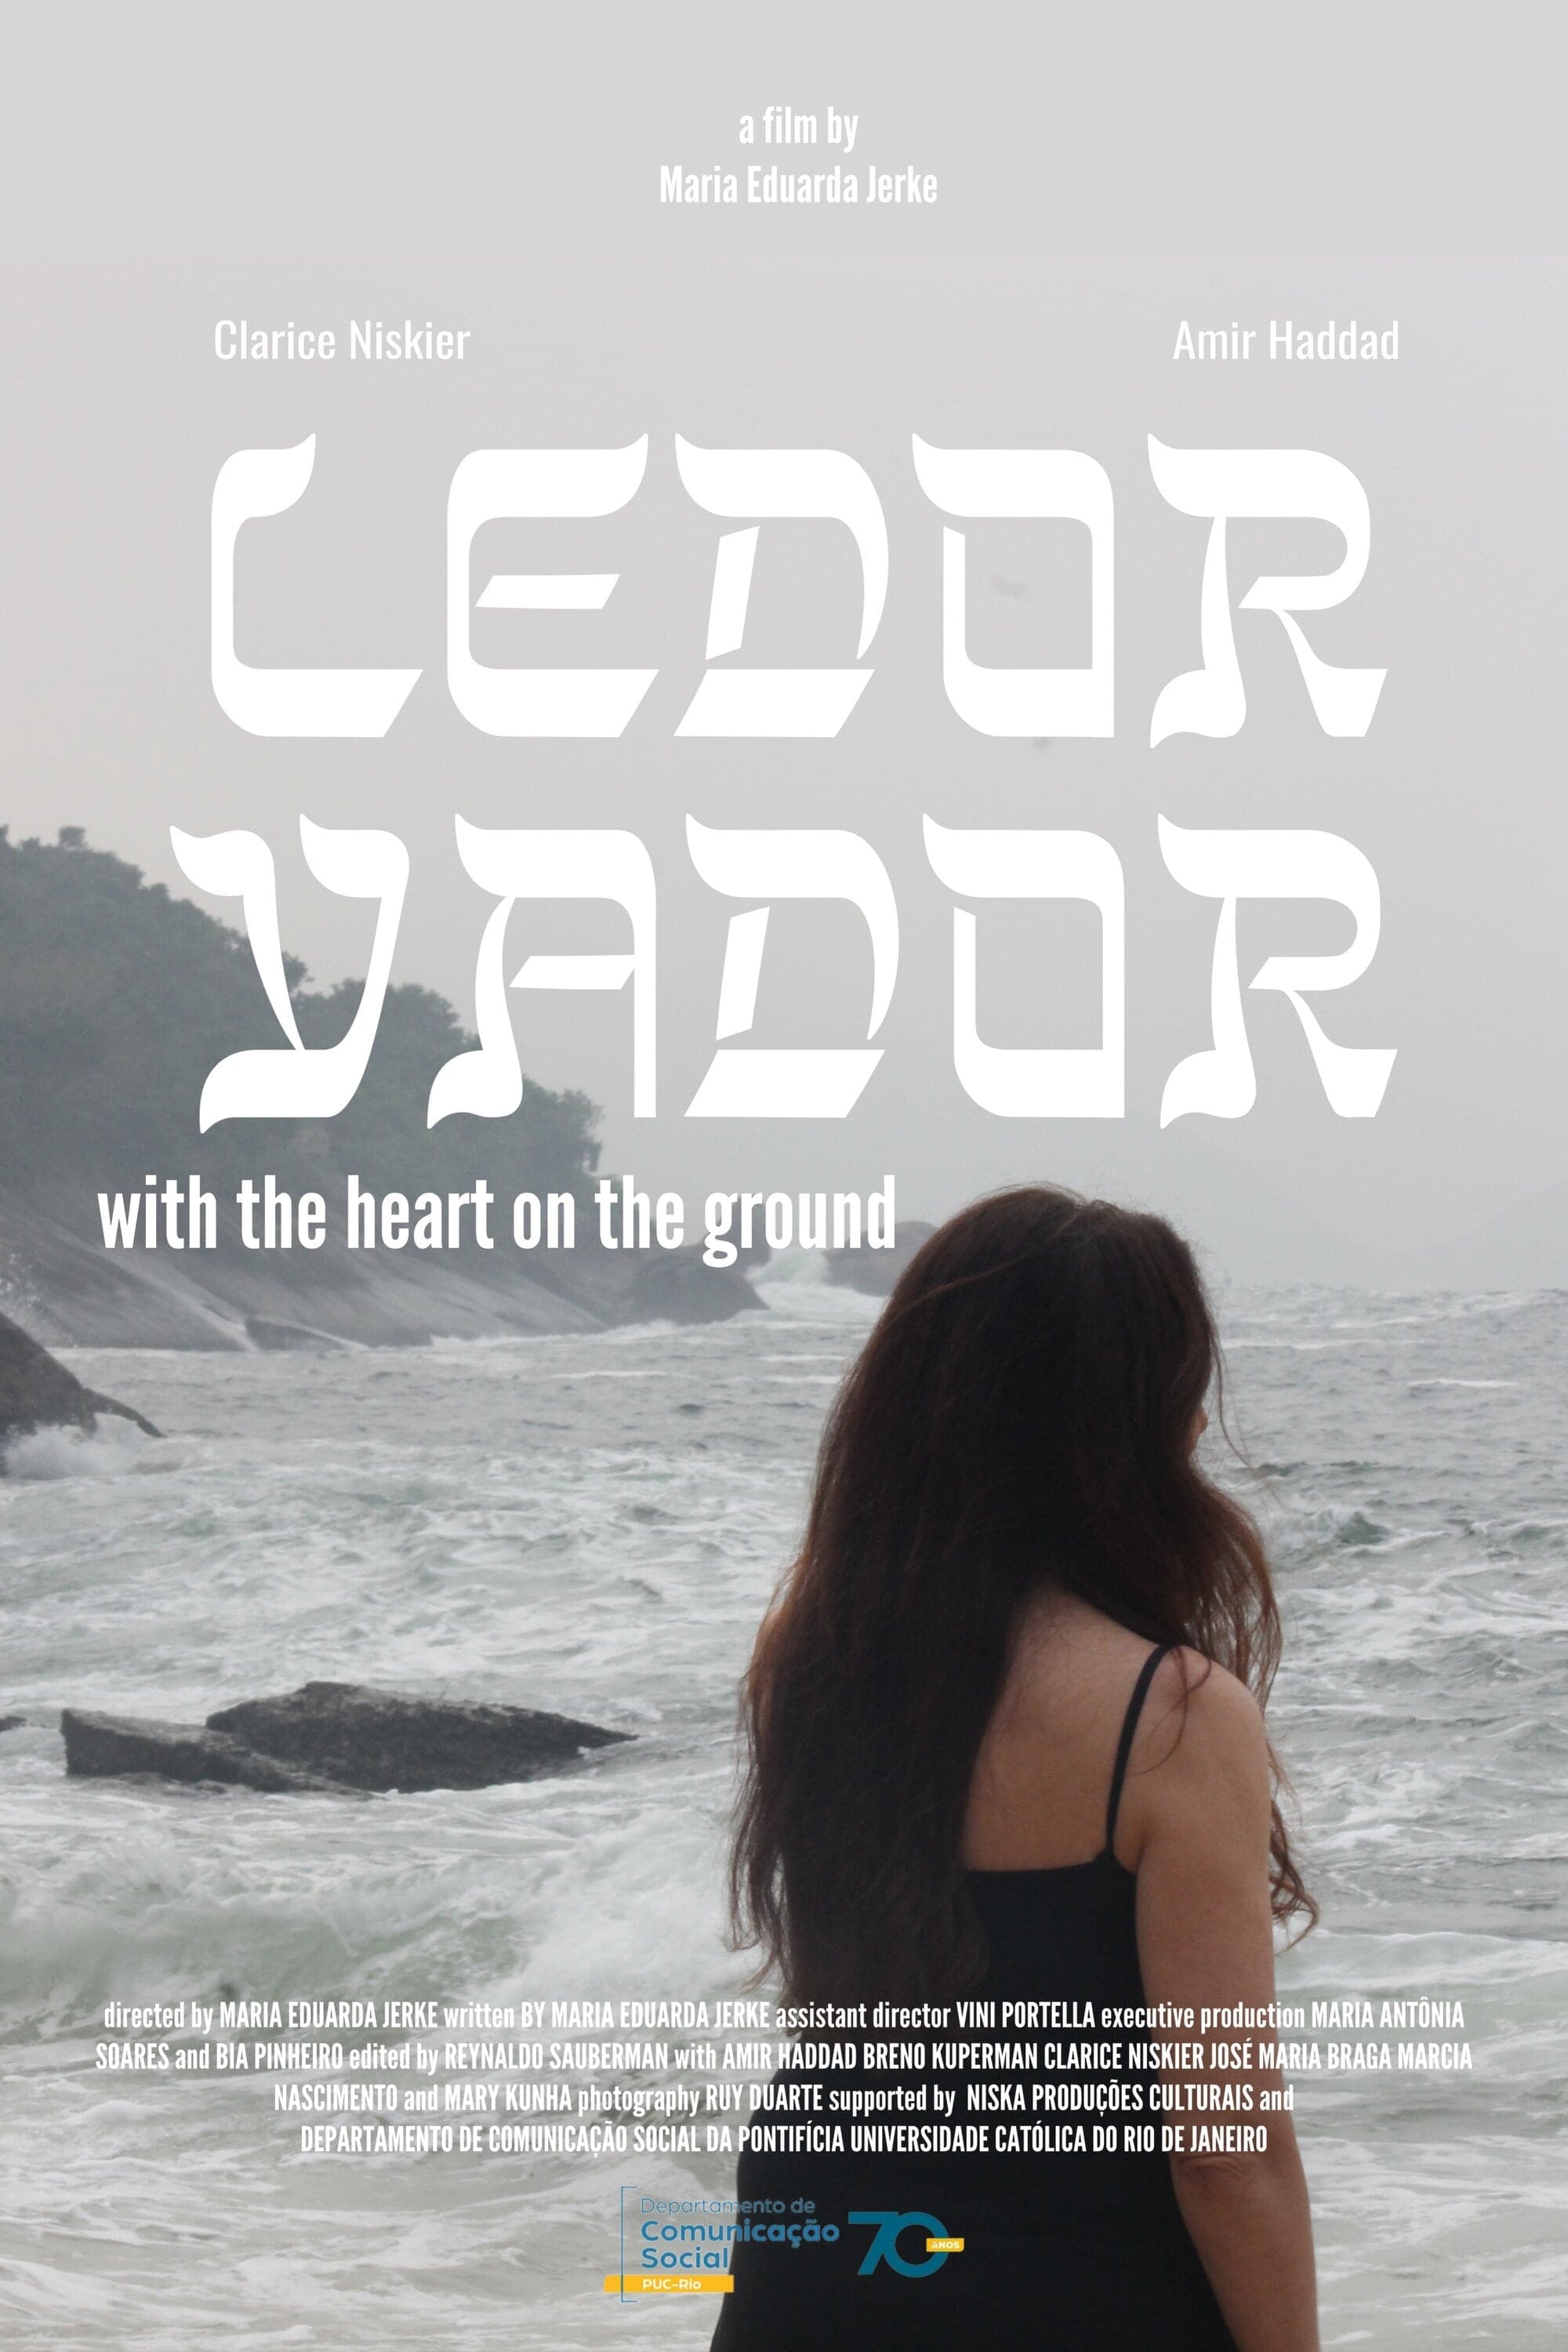 Ledor Vador, with the heart on the ground